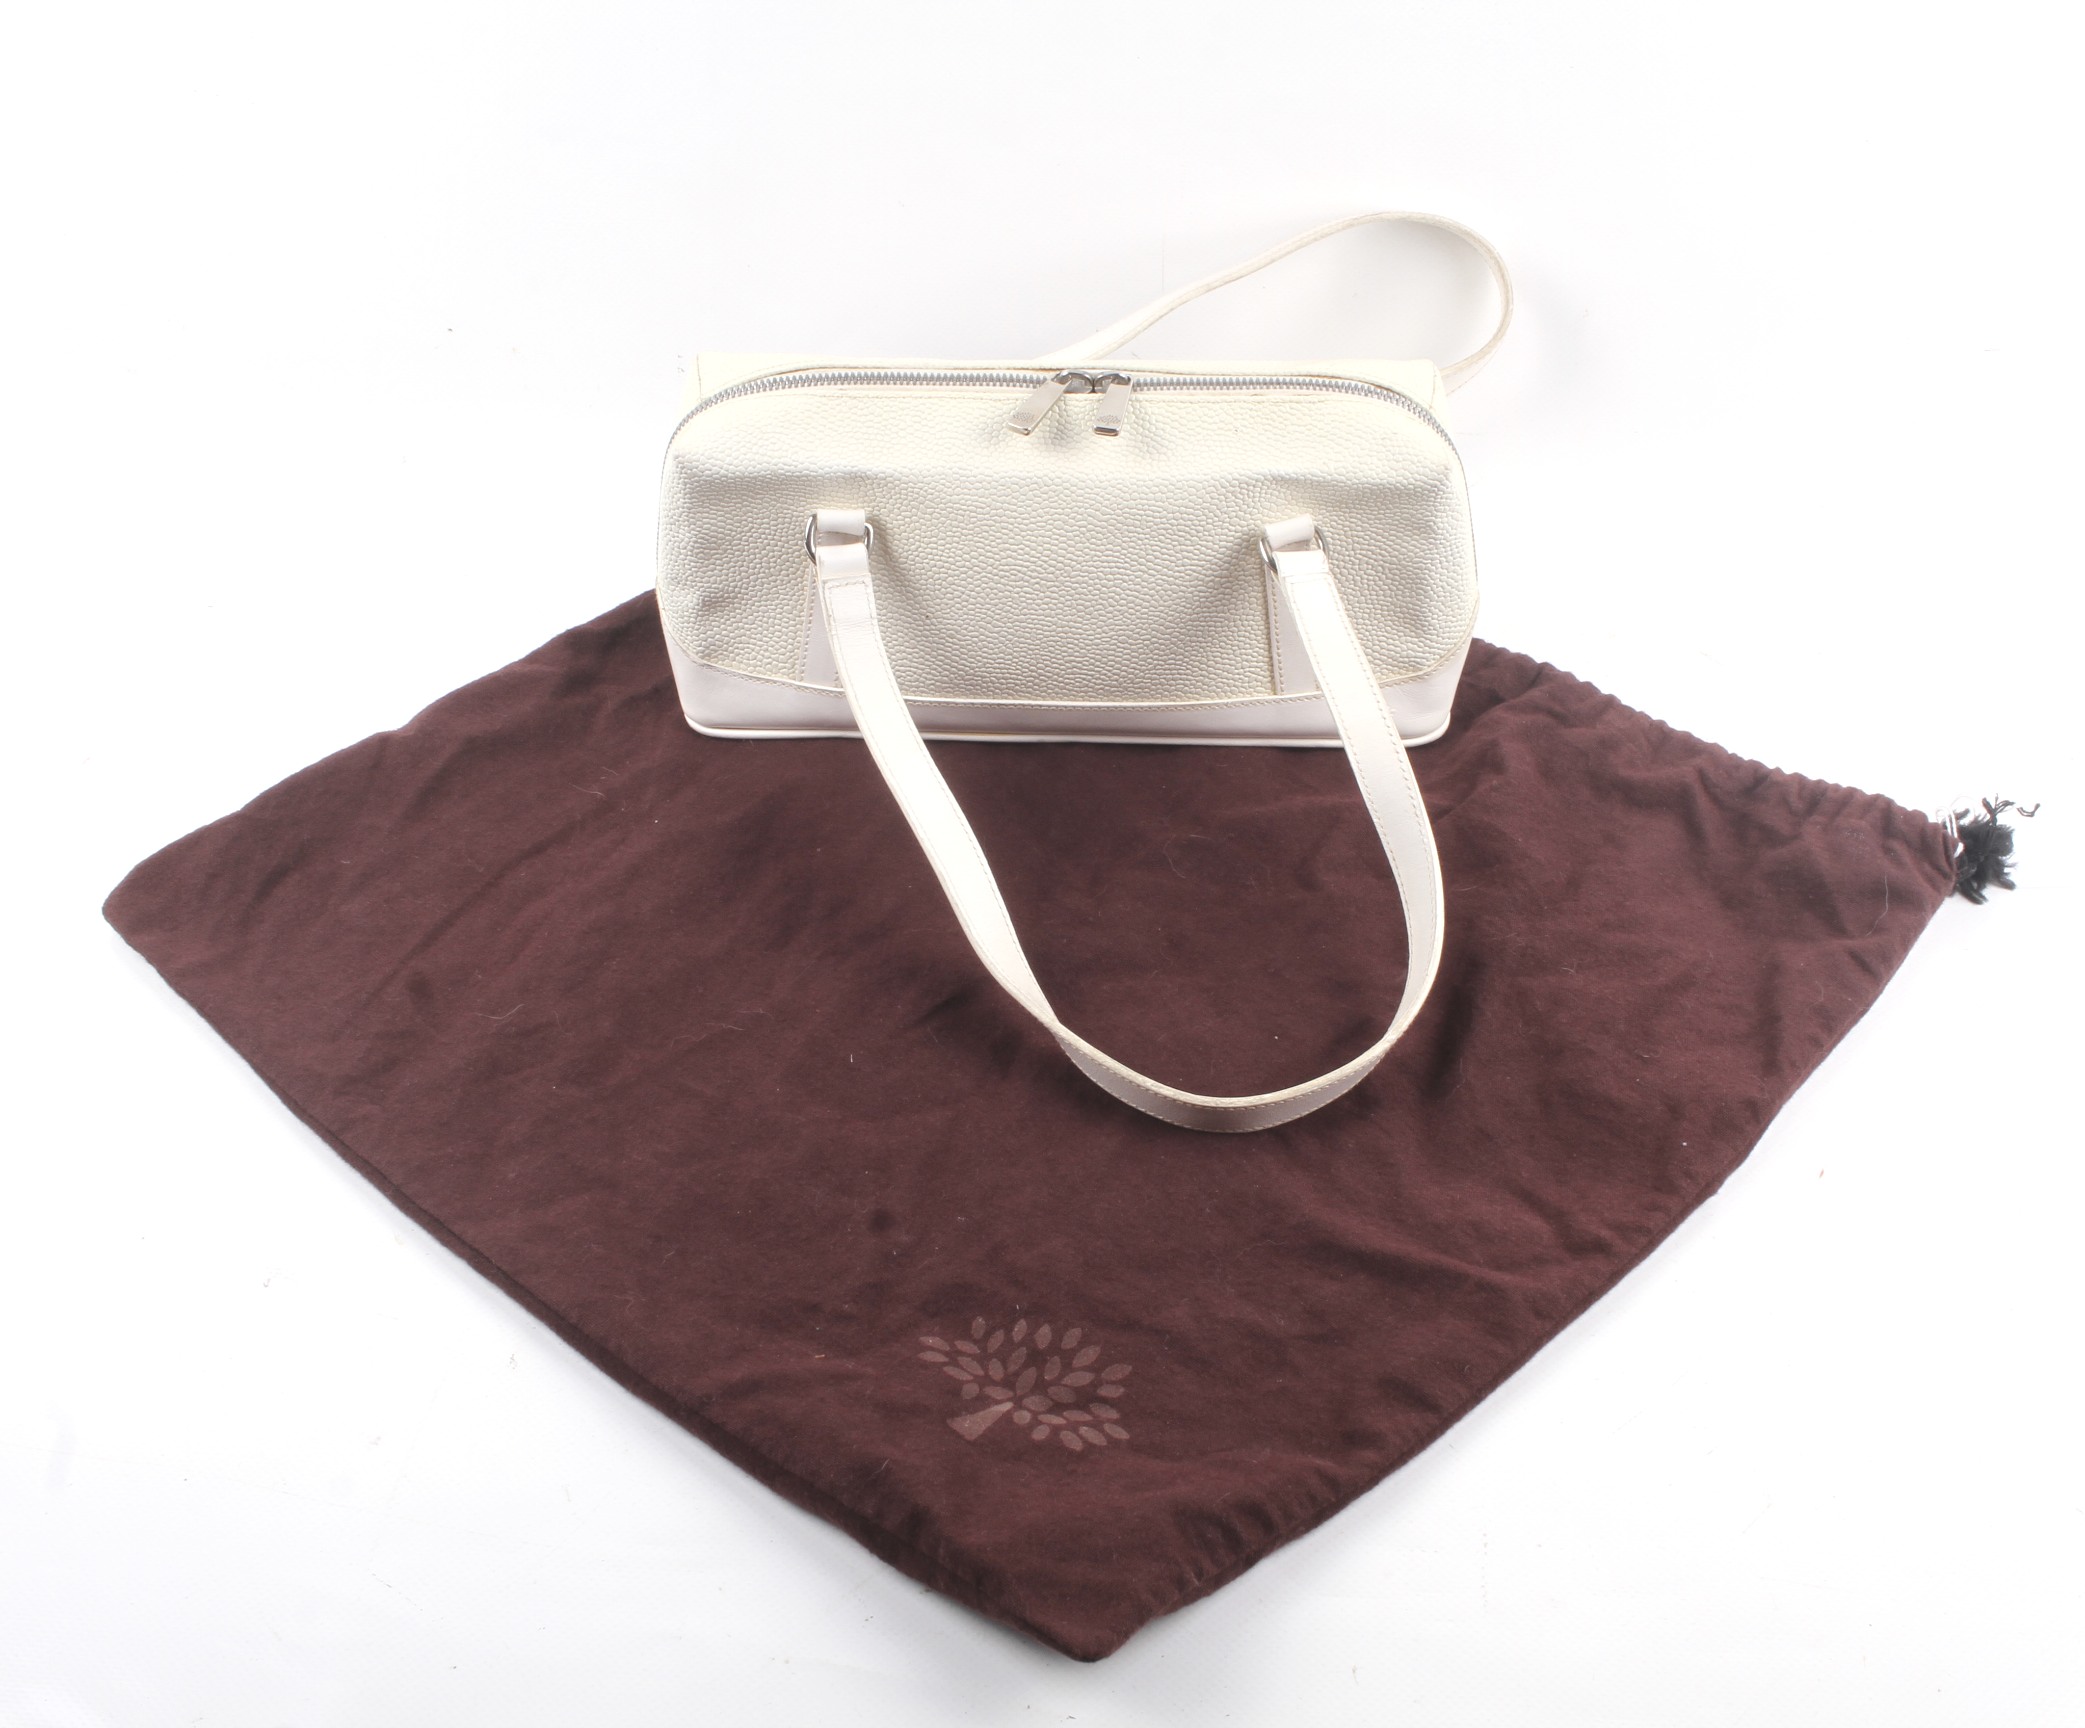 A Mulberry white leather handbag. - Image 3 of 3